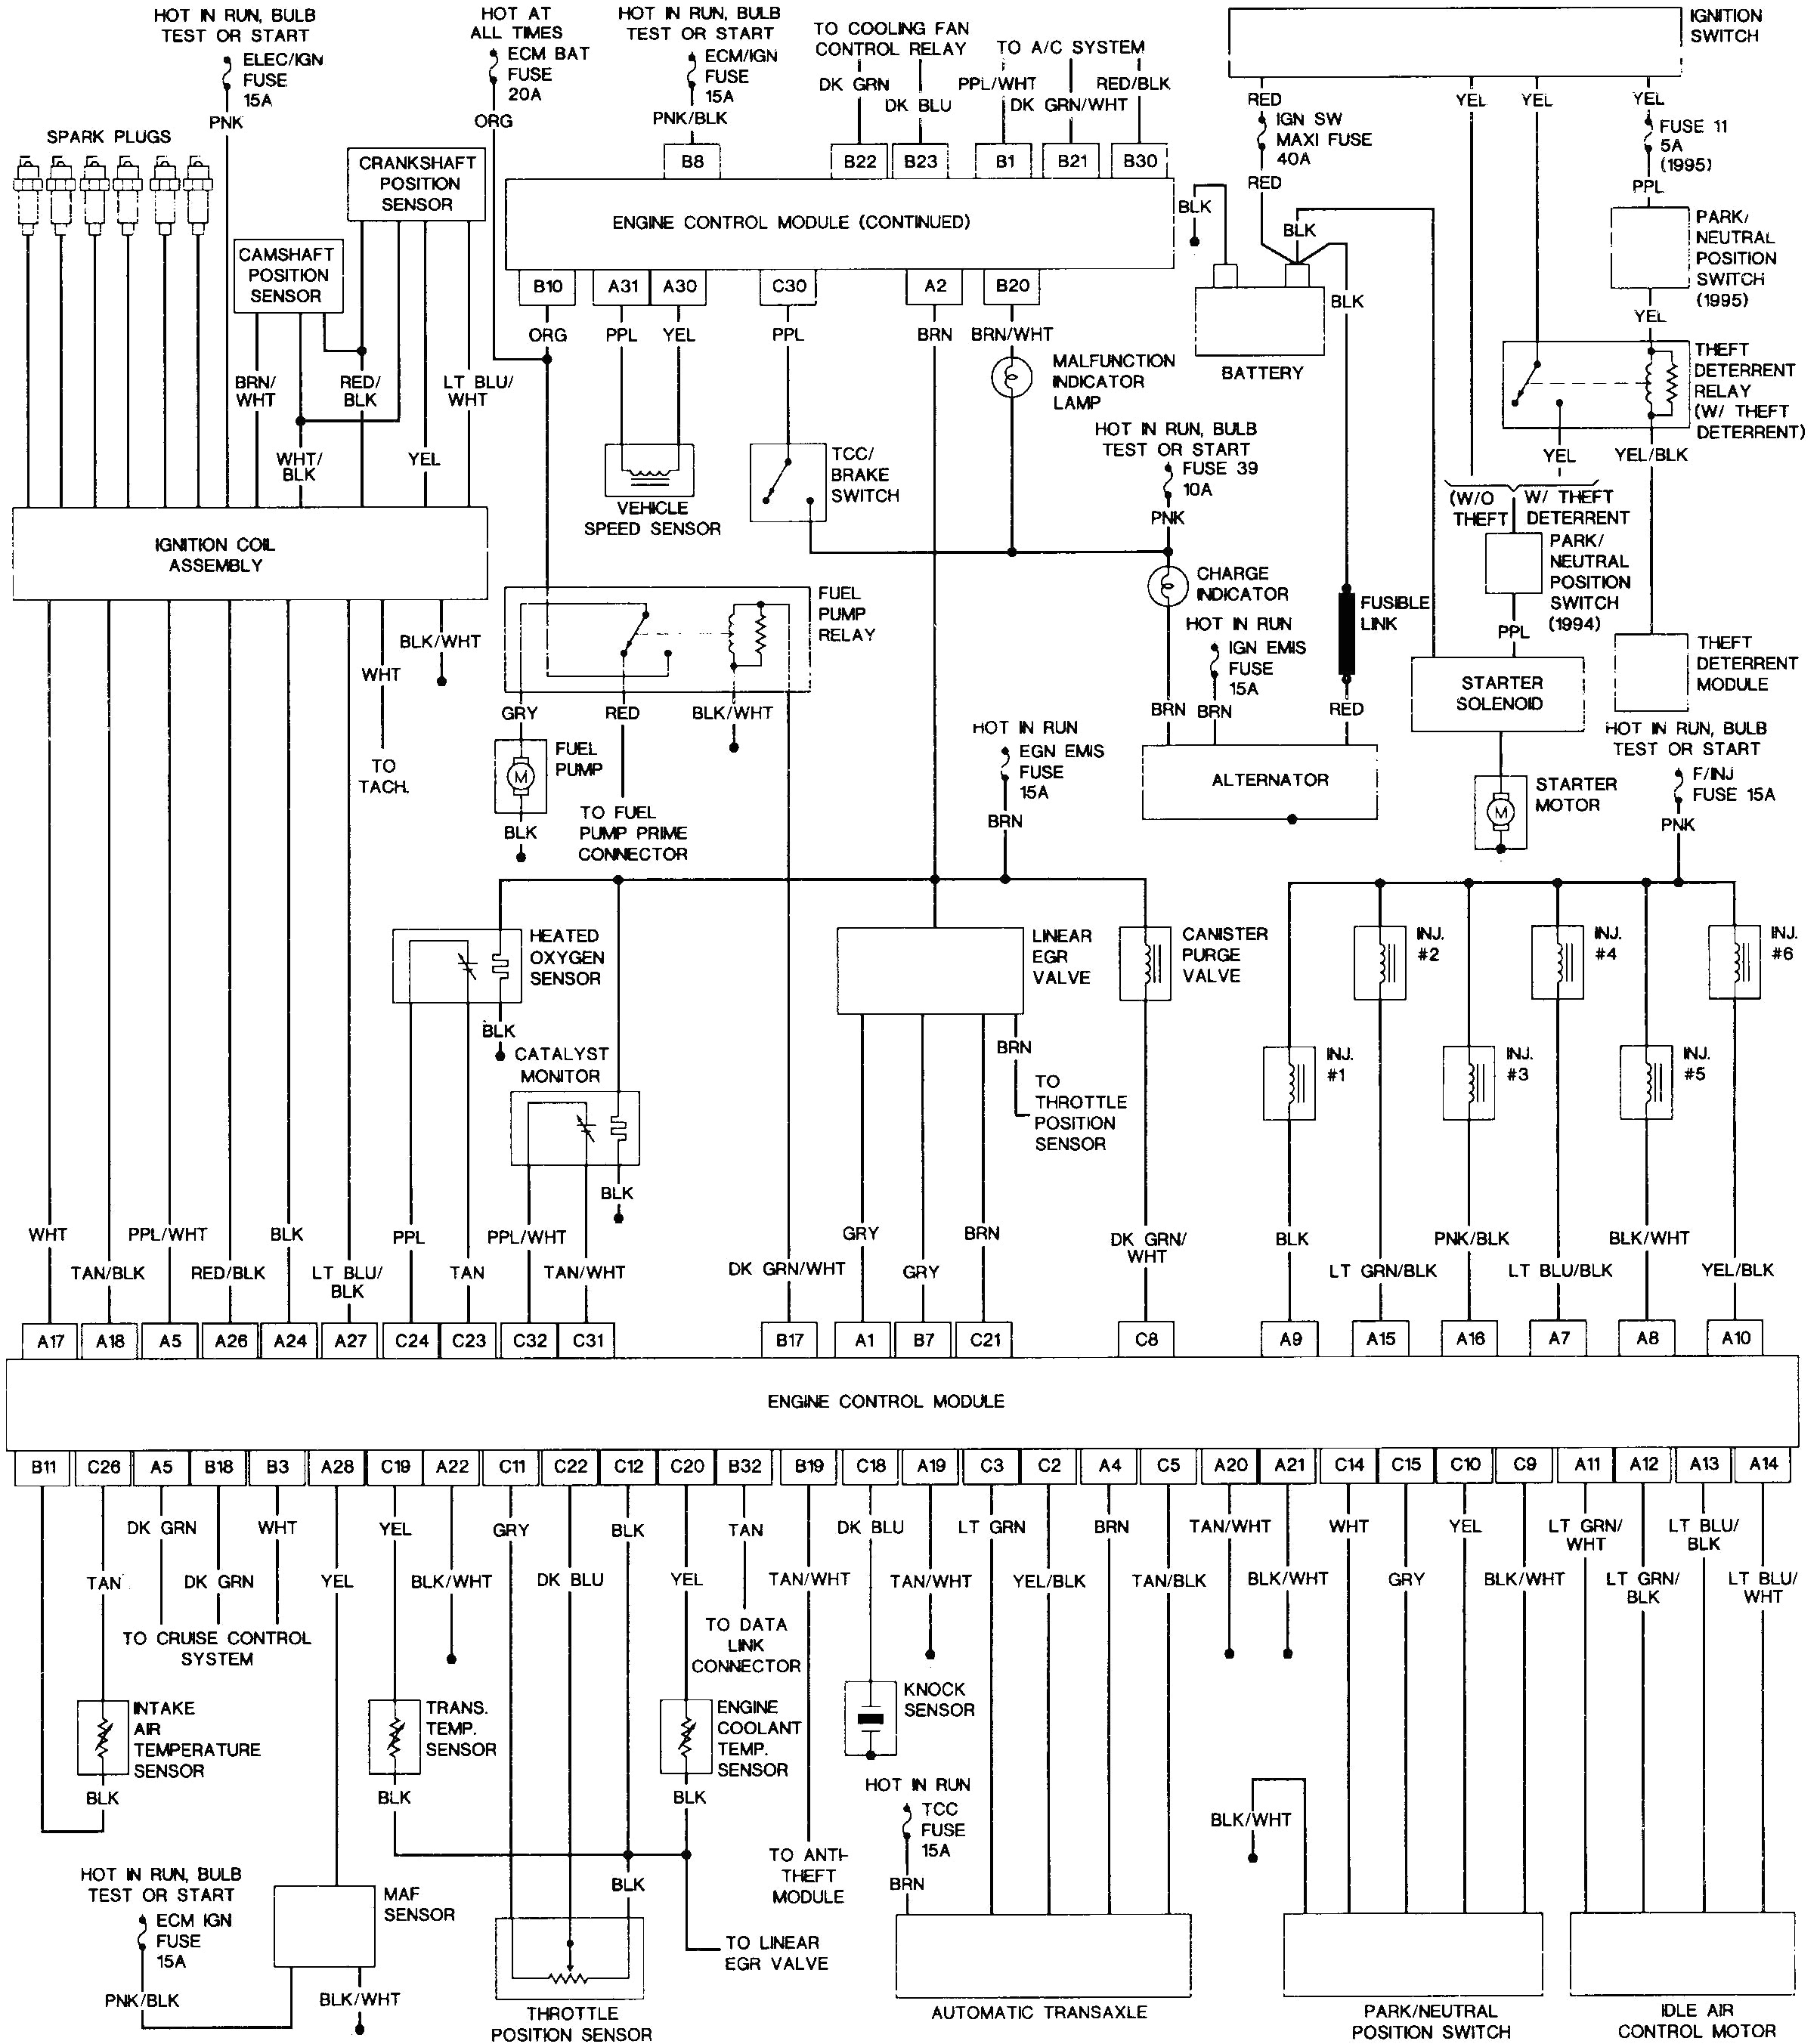 wiring diagram along with 2000 buick century vacuum line diagram 2003 buick century heater core on